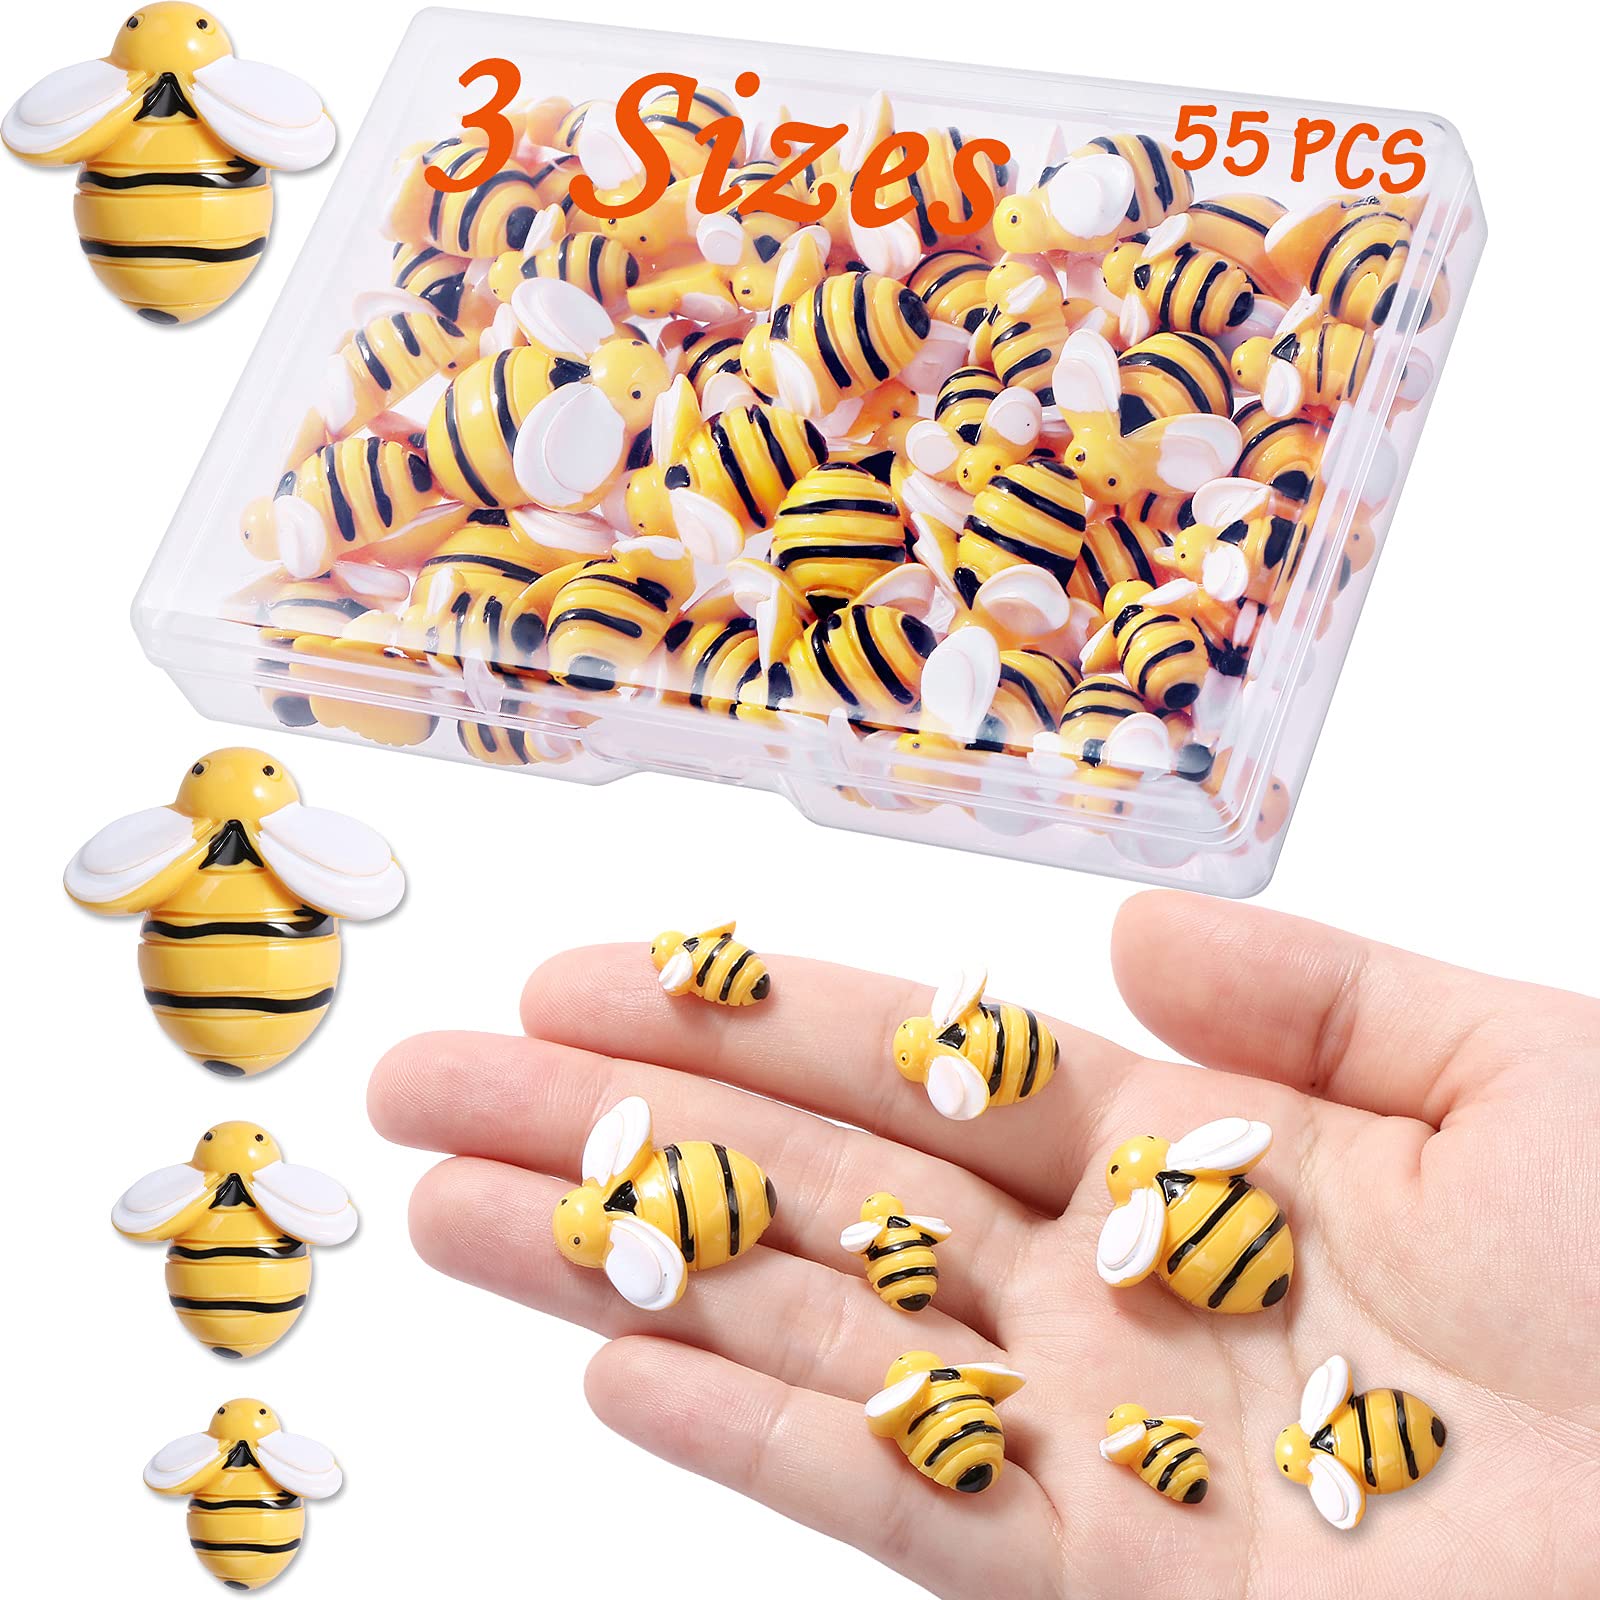 Garneck 50pcs Resin bee Resin Bumble Bees Tiny Craft Bees Toys Mini Bees  for Cake Mini Decorations bee Buttons Edible Bees for Cupcakes Mini Bumble